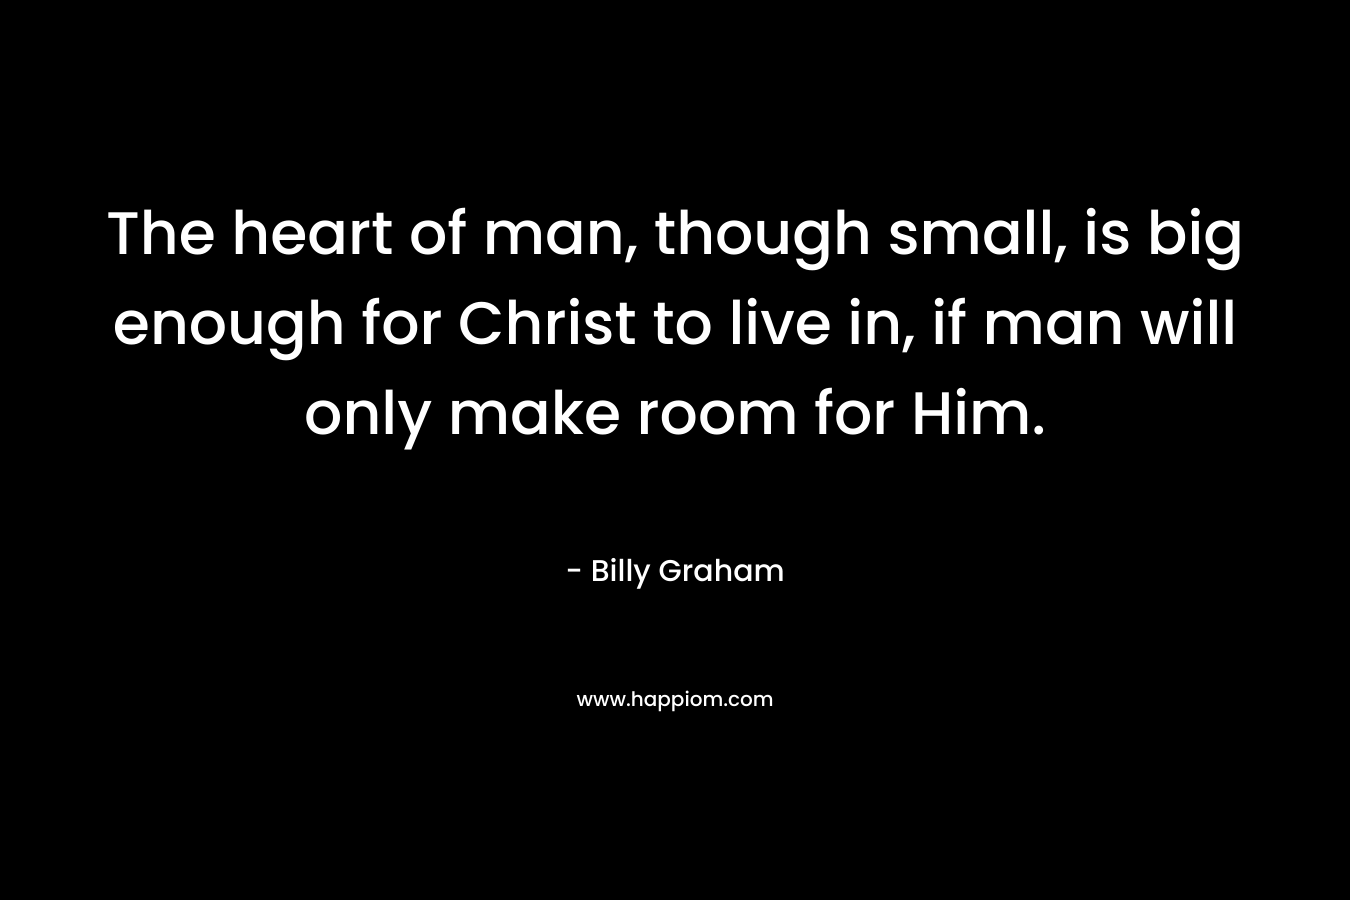 The heart of man, though small, is big enough for Christ to live in, if man will only make room for Him.